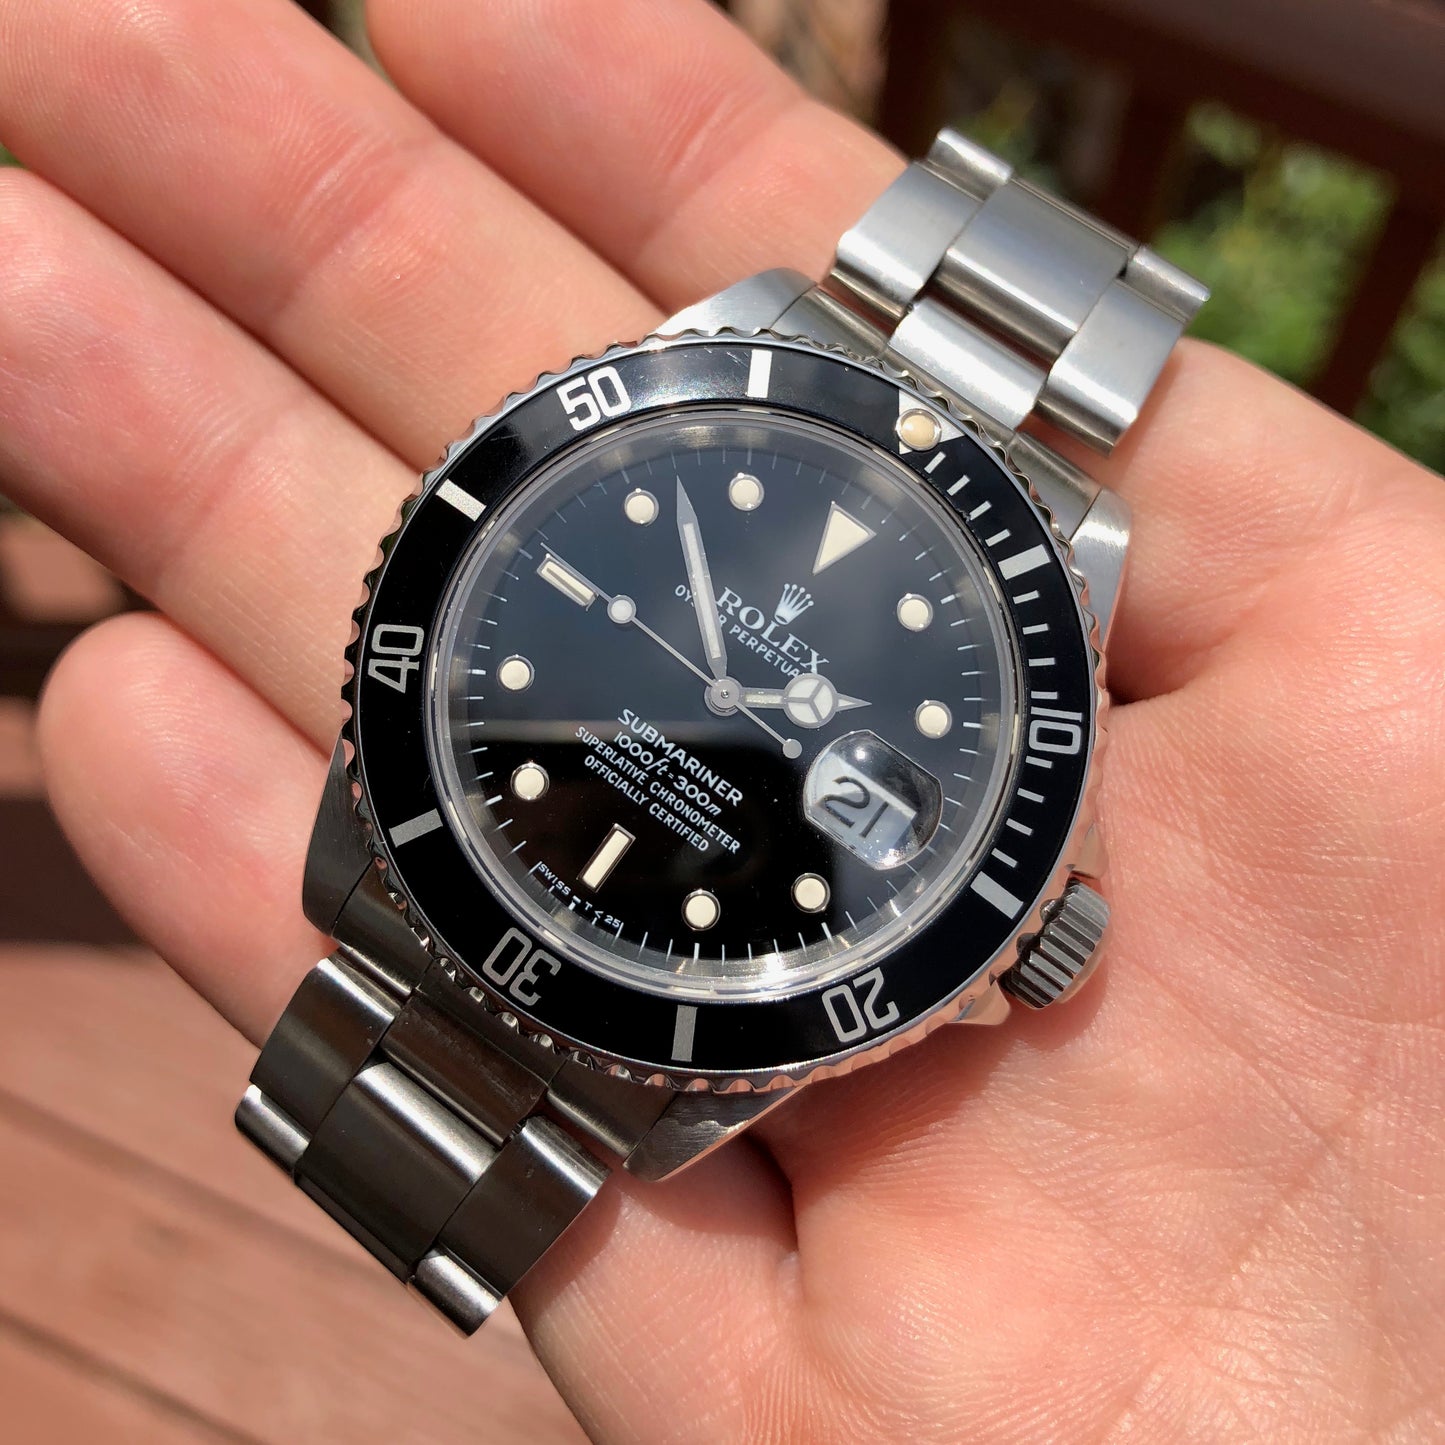 Rolex Submariner 16610 Date Stainless Steel Automatic Cal. 3135 Box & Papers Circa 1989 - Hashtag Watch Company